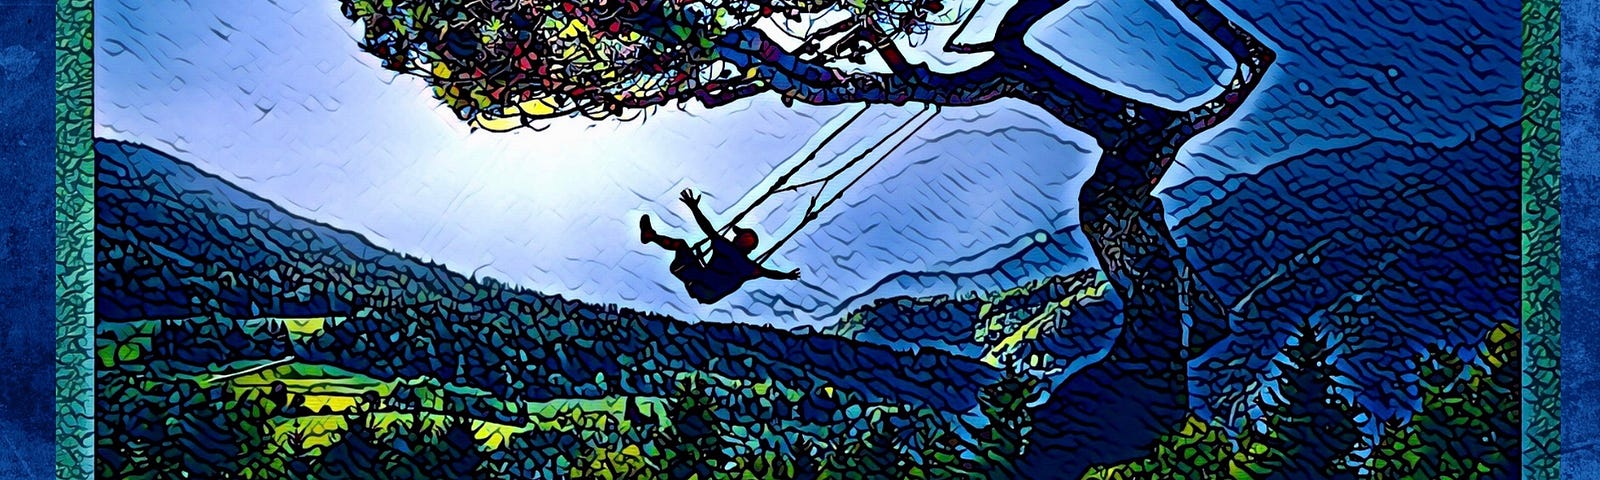 Boy swings from a curved tree positioned over a deep valley